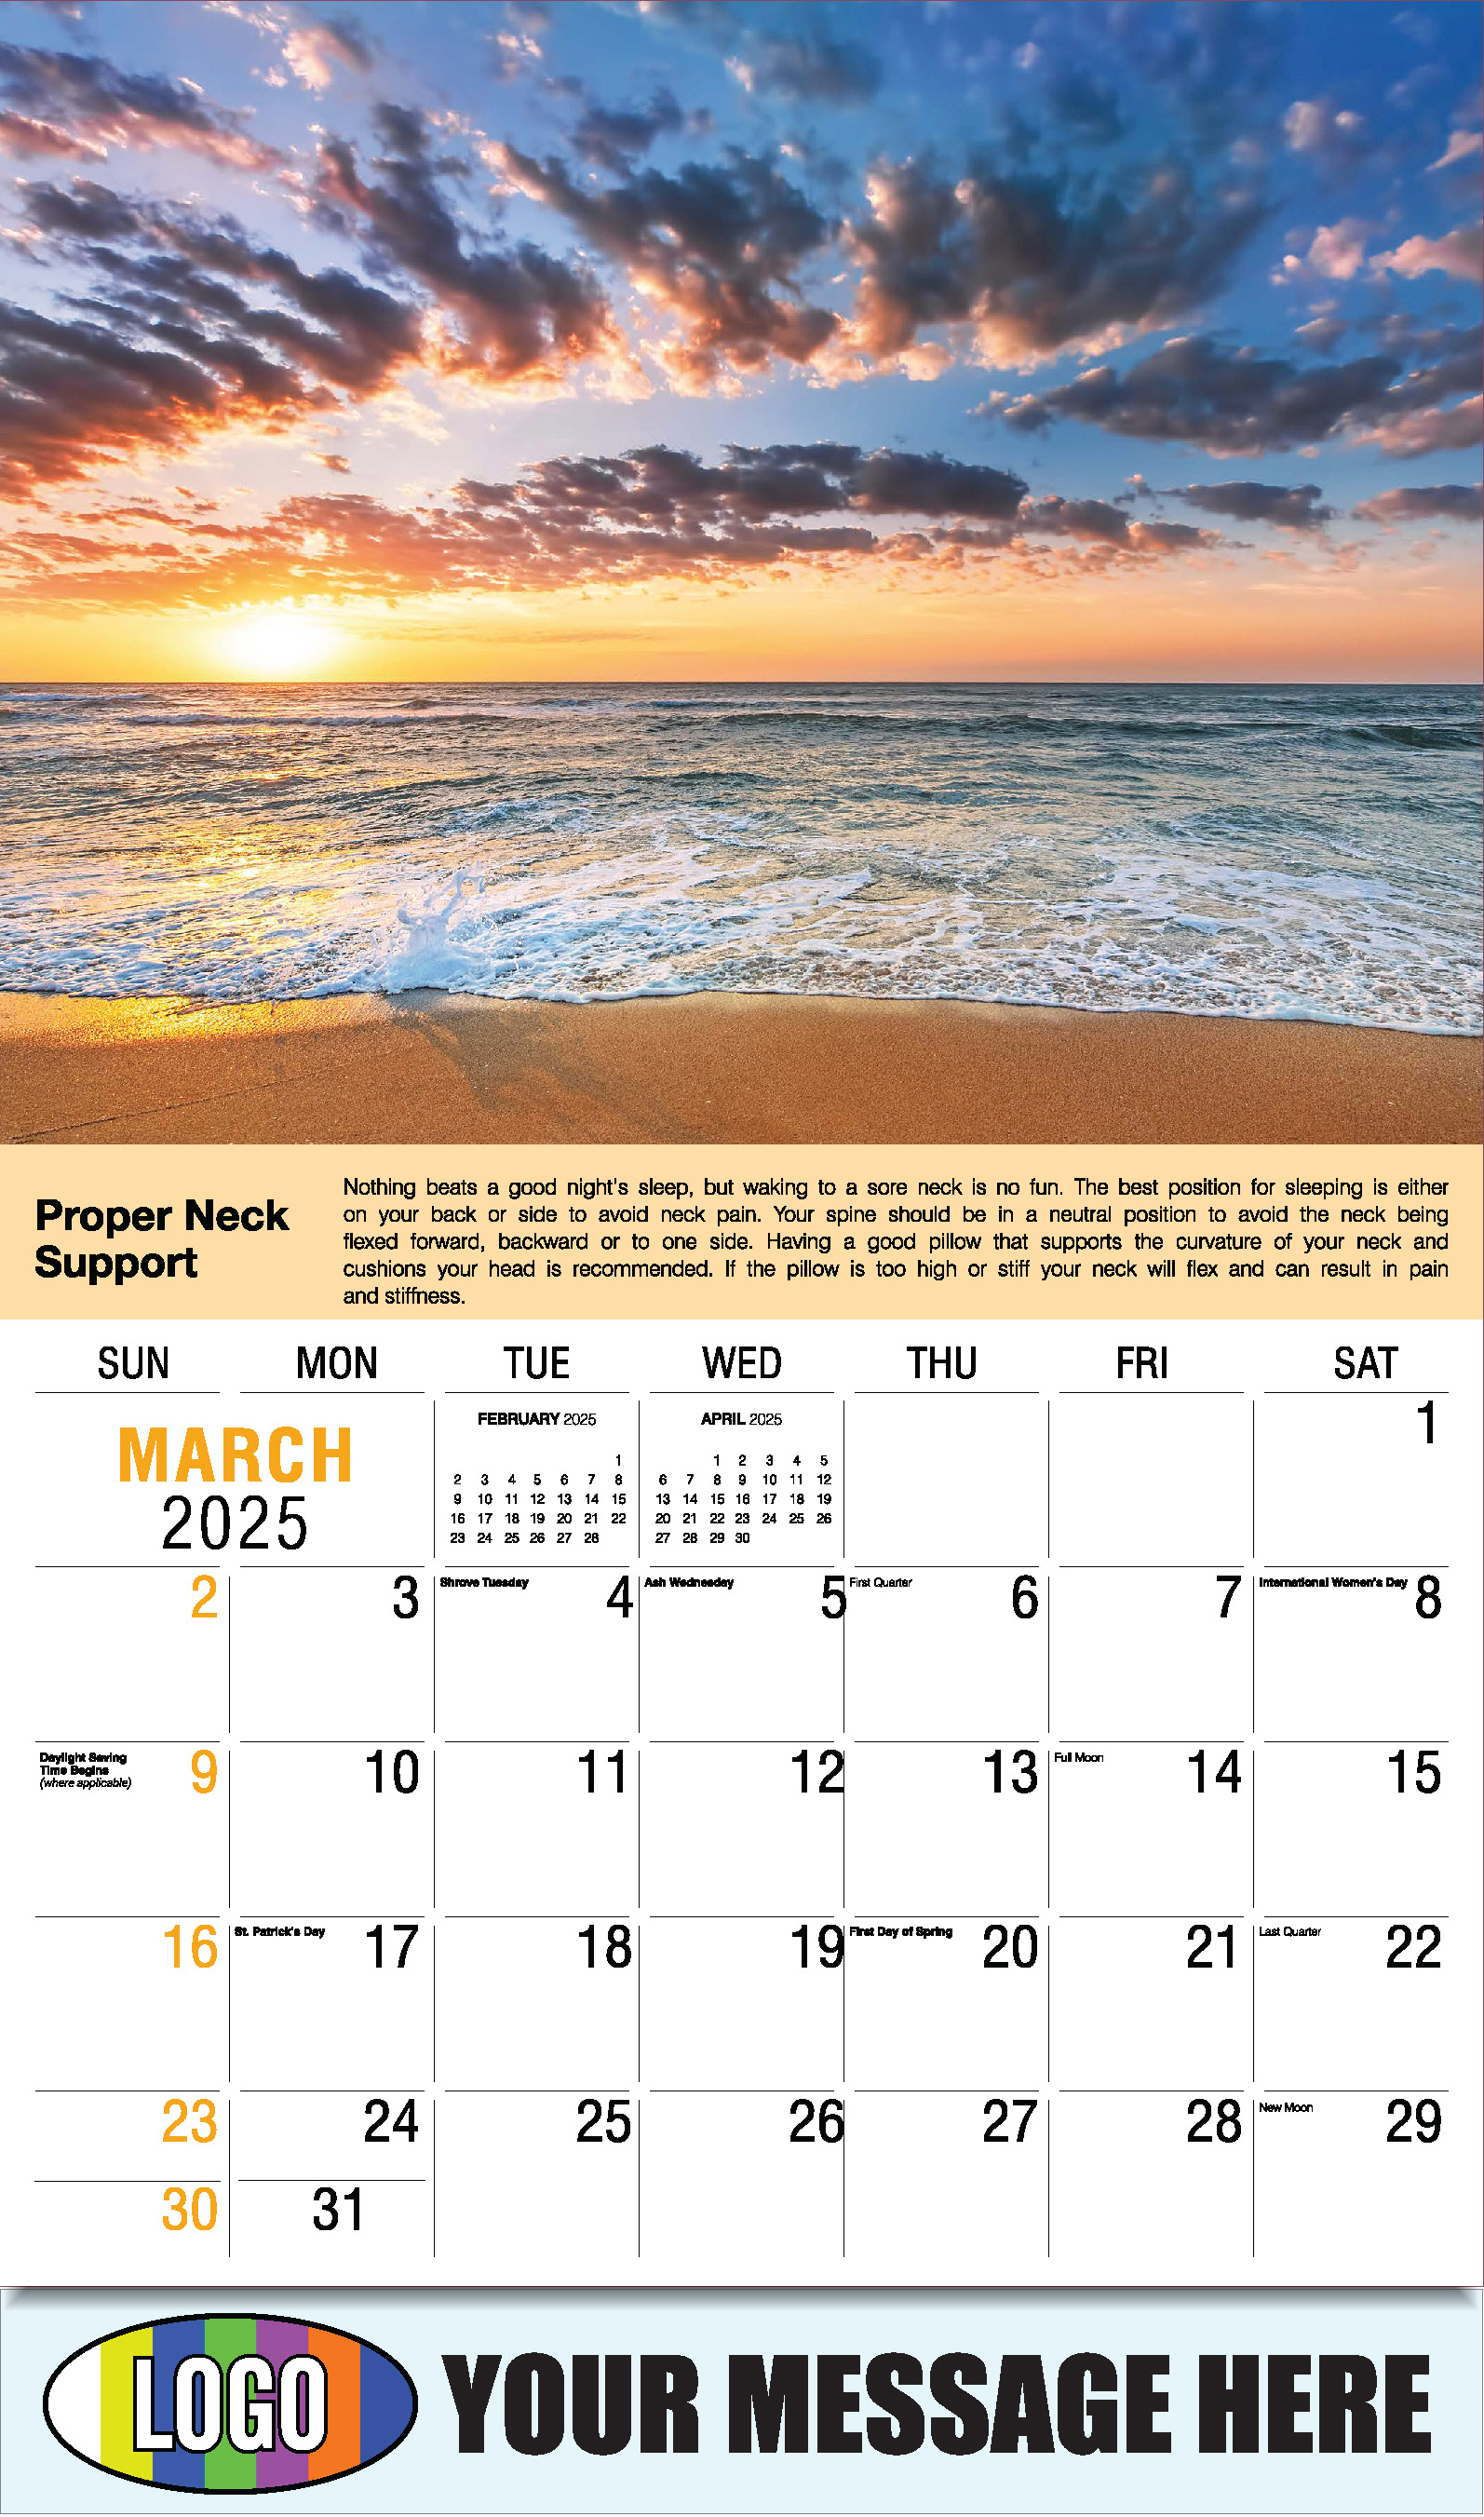 Health Tips 2025 Business Promo Wall Calendar - March